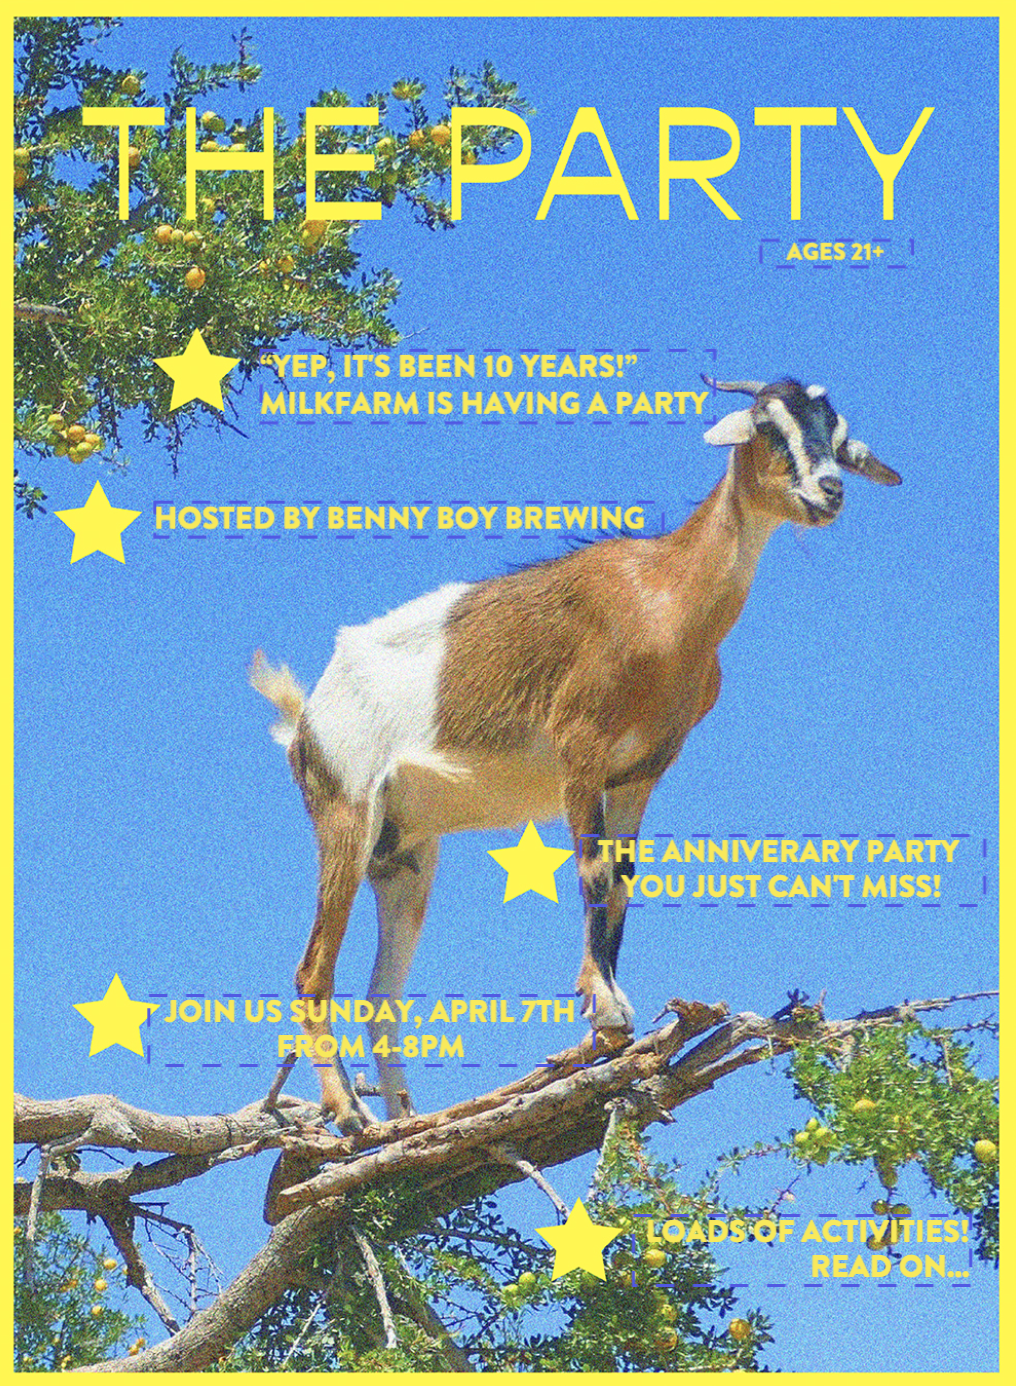 Photo of the Party Flyer which says Milkfarm's anniversary party is going to be hosted by Benny Boy Brewing and that the event is 21+. There is a goat standing on a tree branch with blue skies in the back.